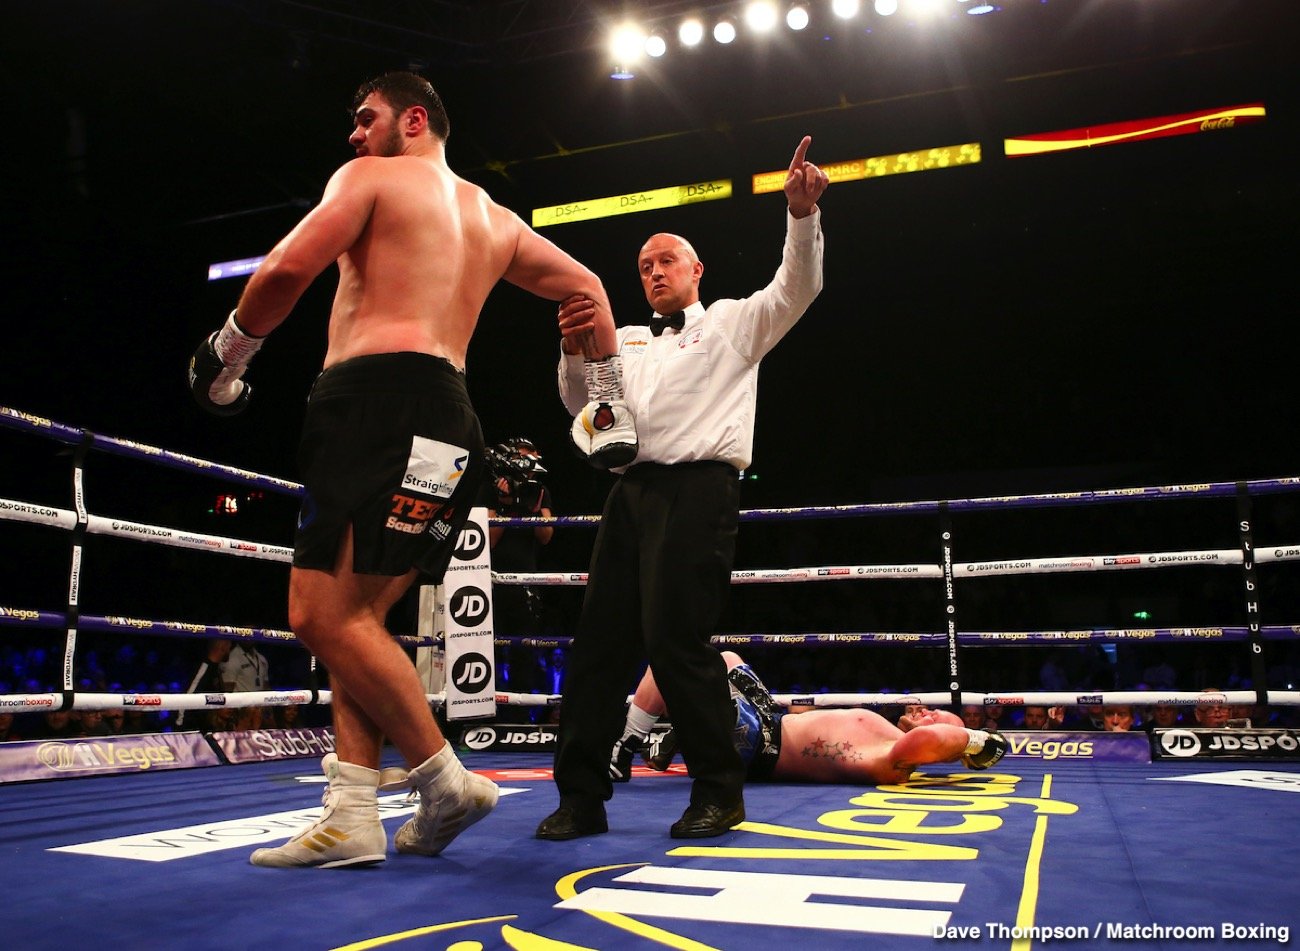 Image: Dave Allen taking risky fight against Christopher Lovejoy on Saturday